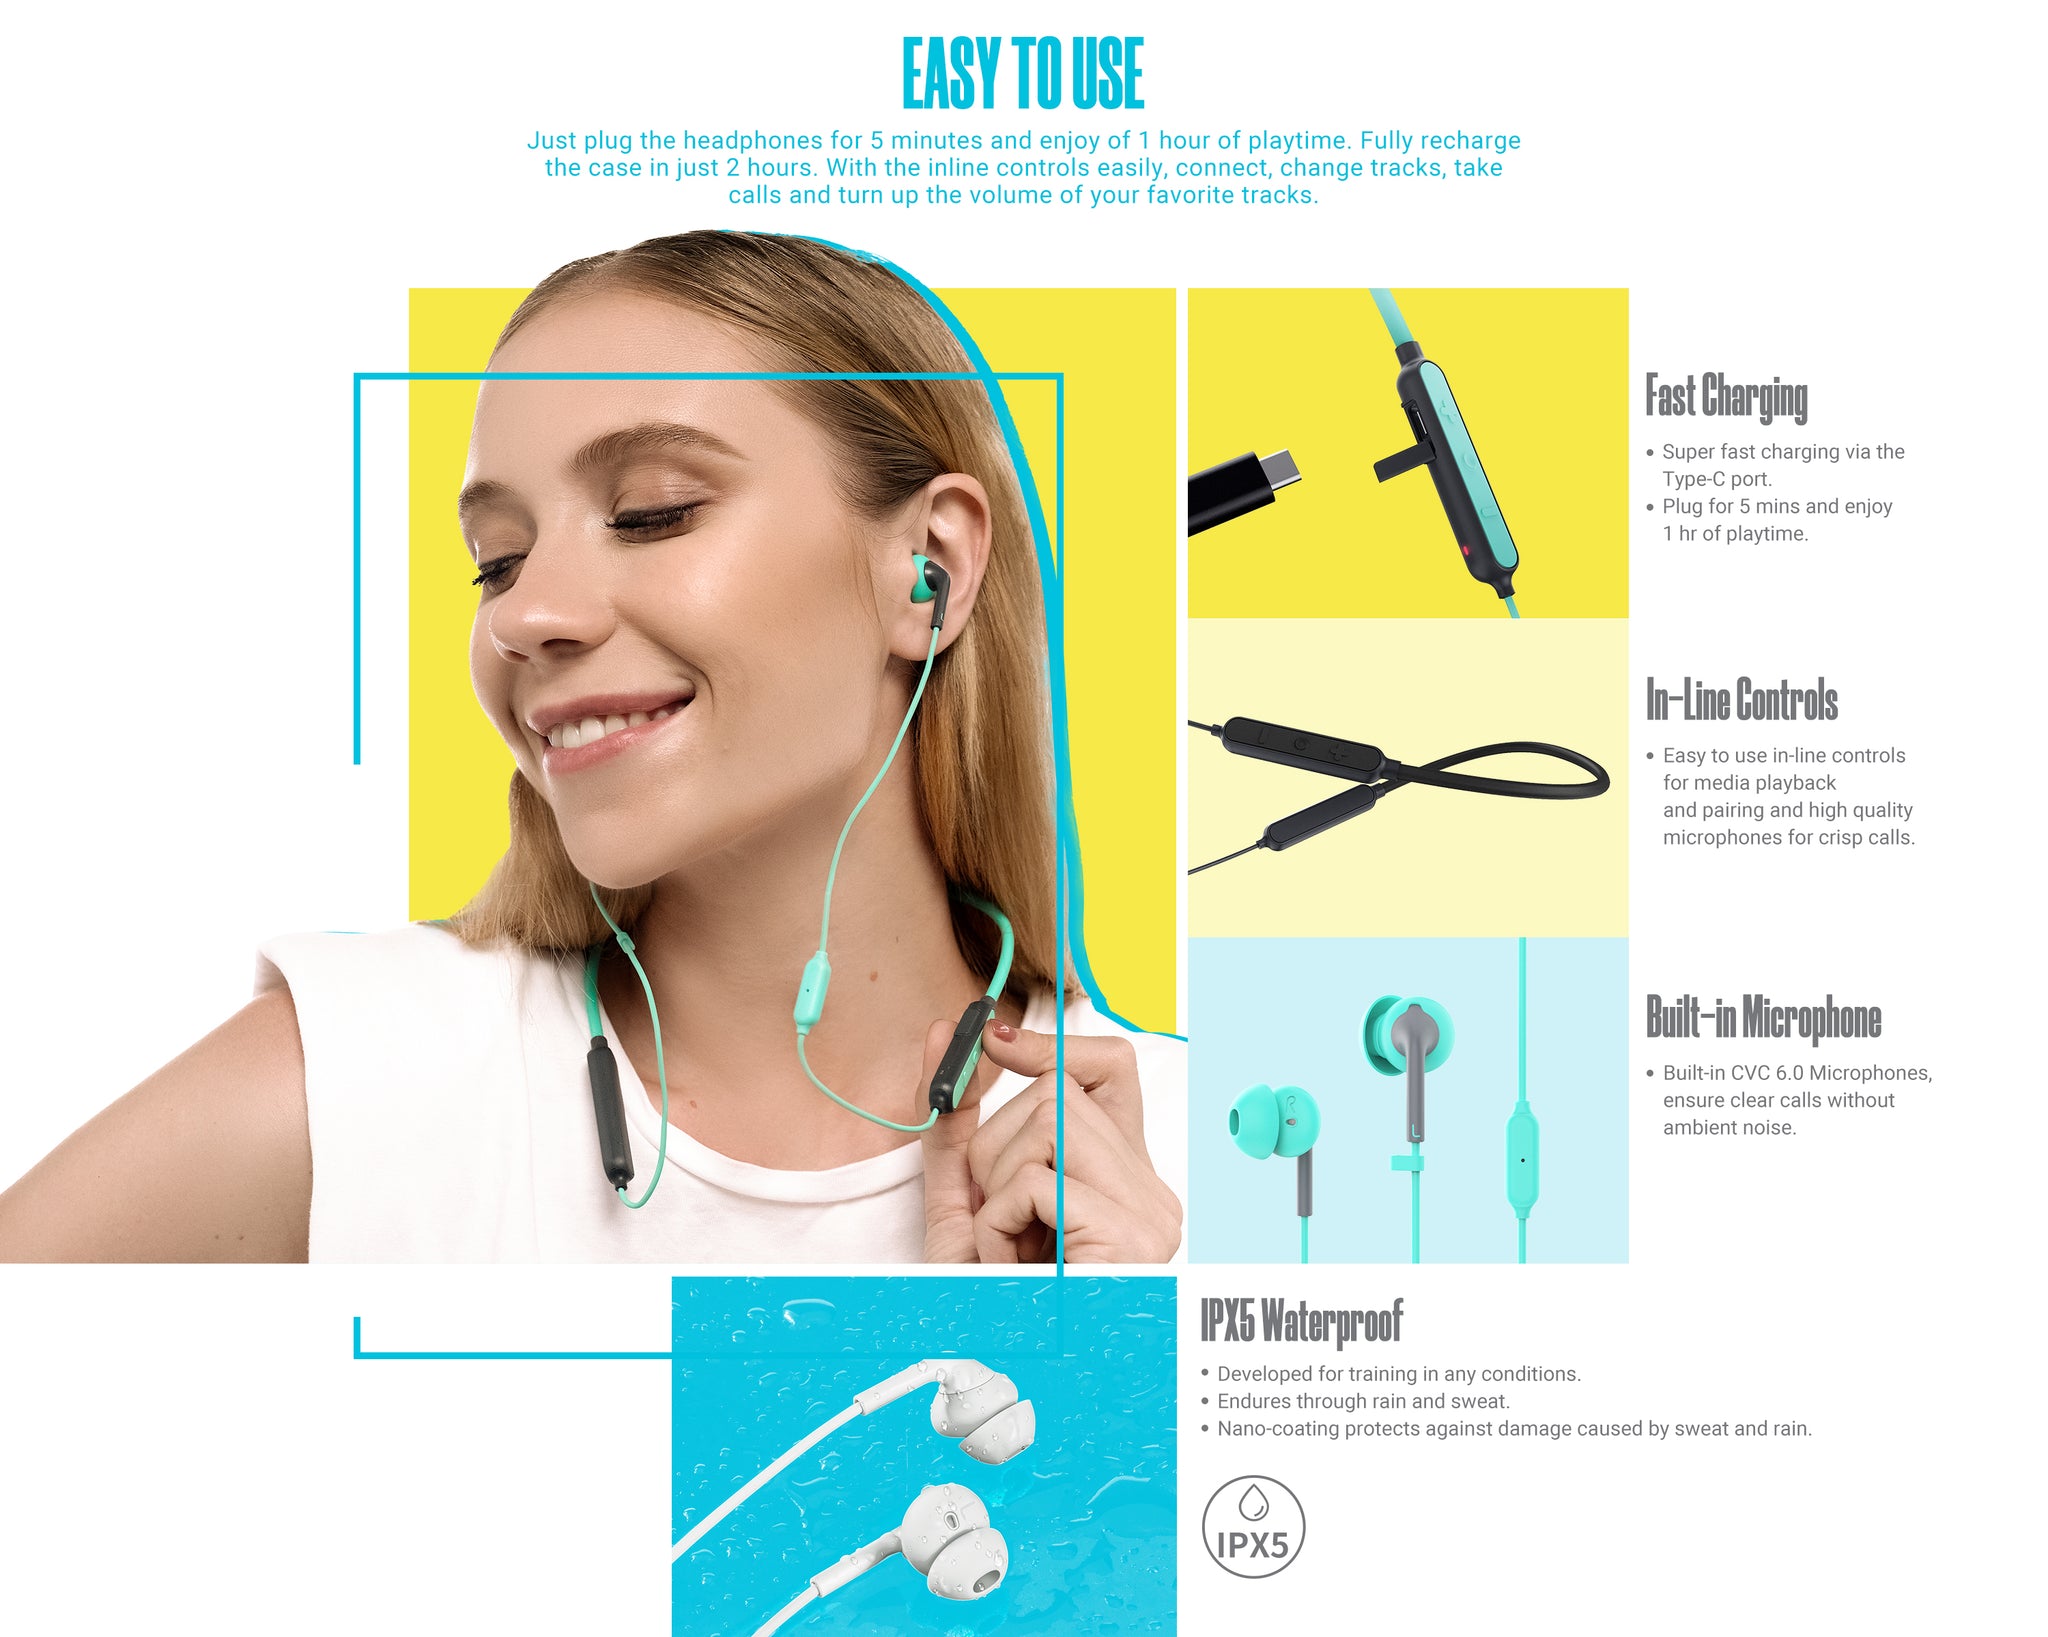 233621 Wave Bluetooth Neckband Headphones IPX5 ​Waterproof & Skin-Friendly Fresh Mint 10.7 mm Drivers 15 Hrs Playtime Stereo Wireless Earbuds with CVC 8.0 Call Noise Cancellation Microphone 